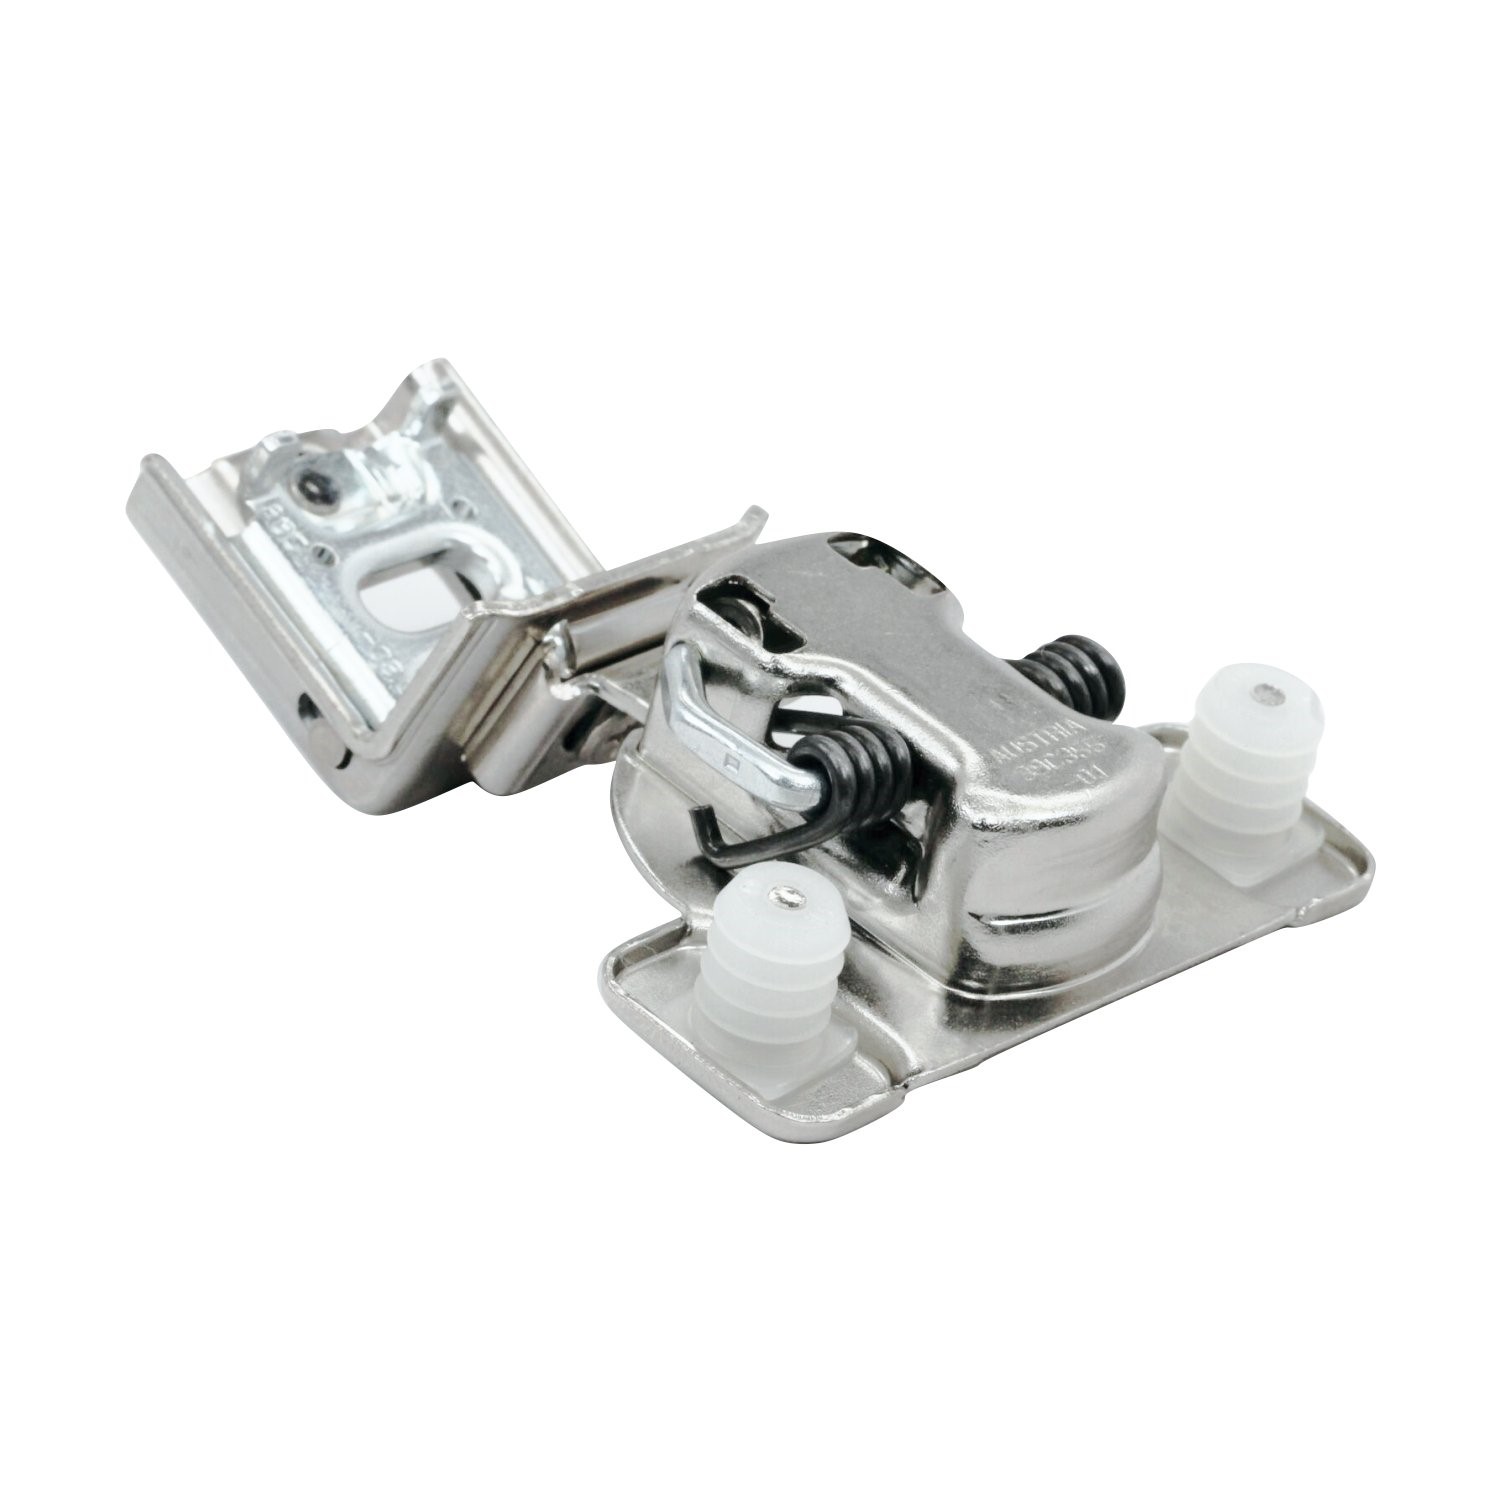 2 Pack 110 Degree Compact 39C Series 1-1/4" Overlay Press-In Self-Closing Cabinet Hinge - image 3 of 7